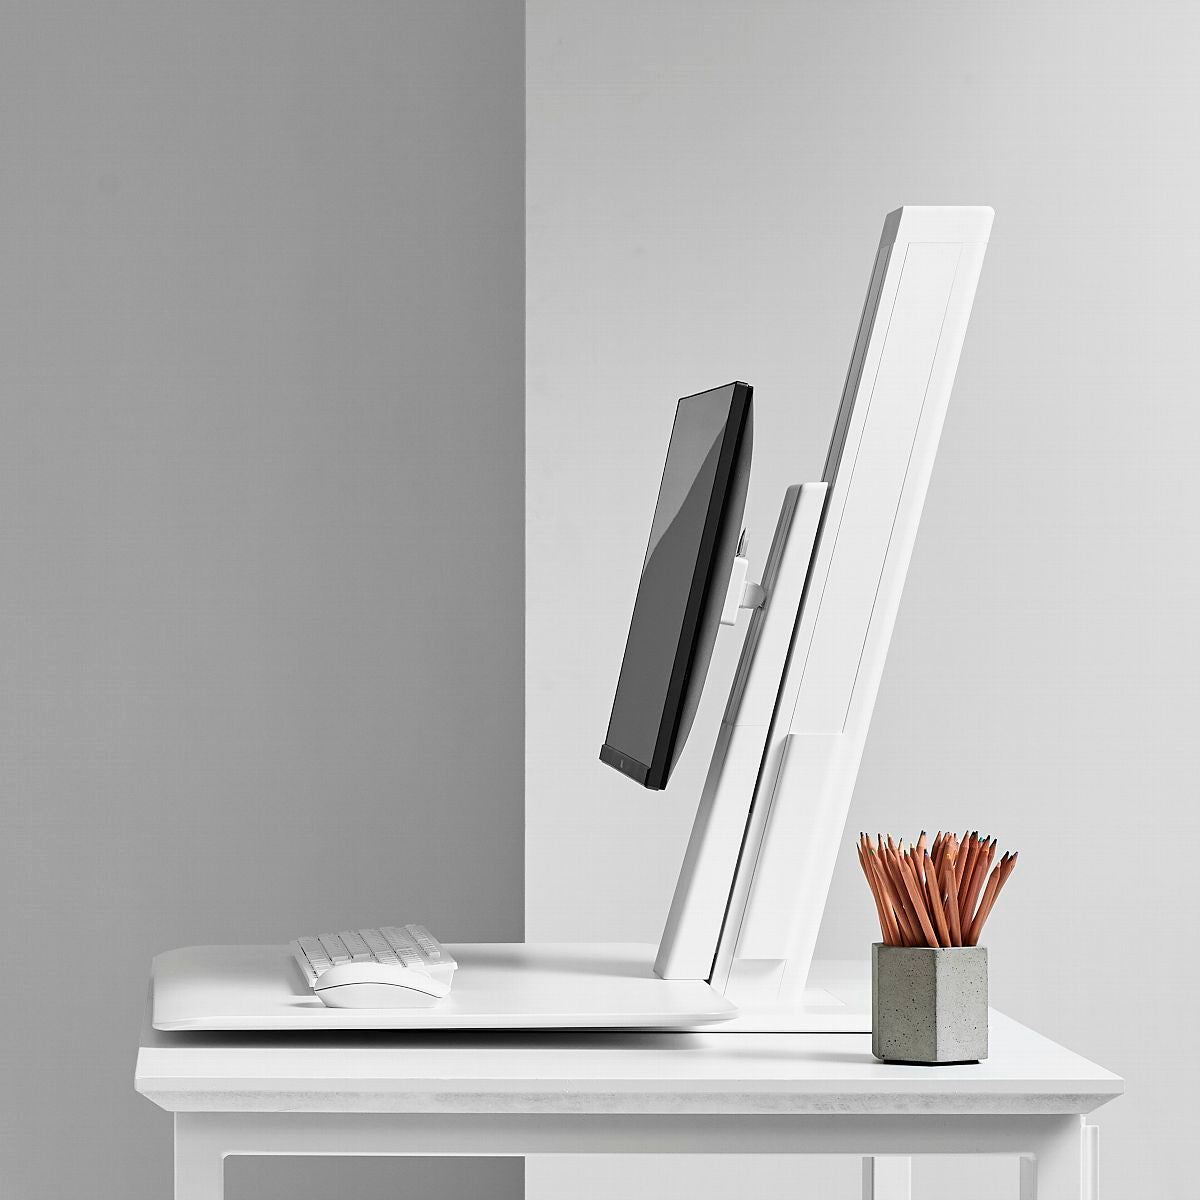 Quickstand ECO, by Humanscale